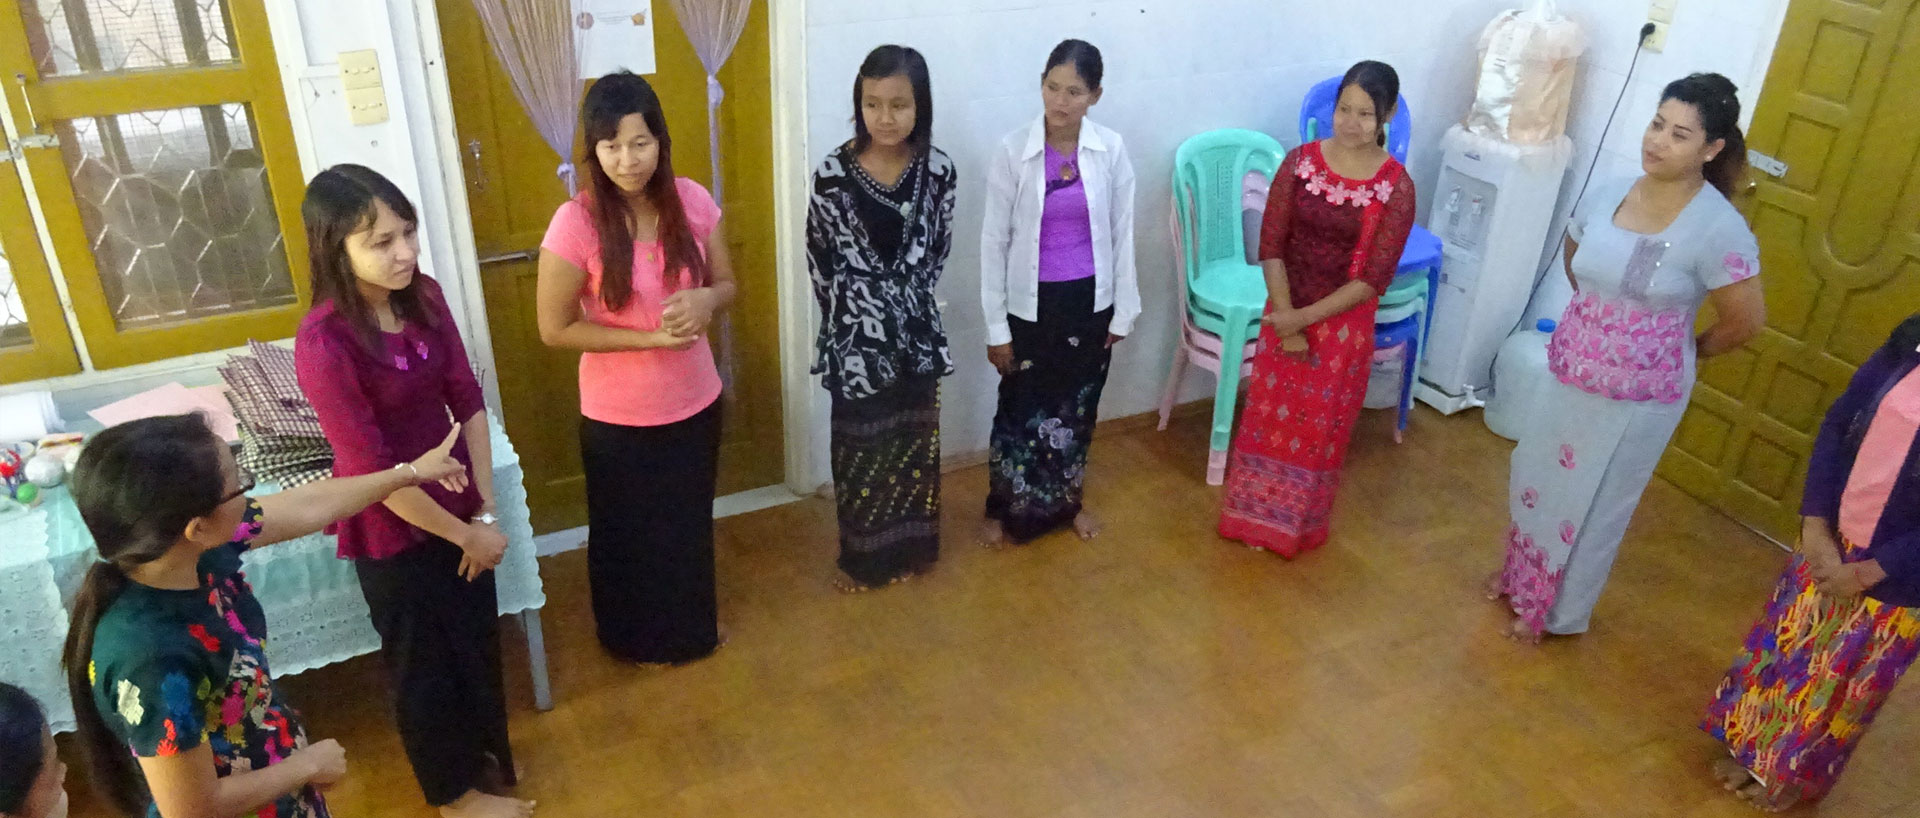 Youth Empowerment and Peacebuilding myanmar